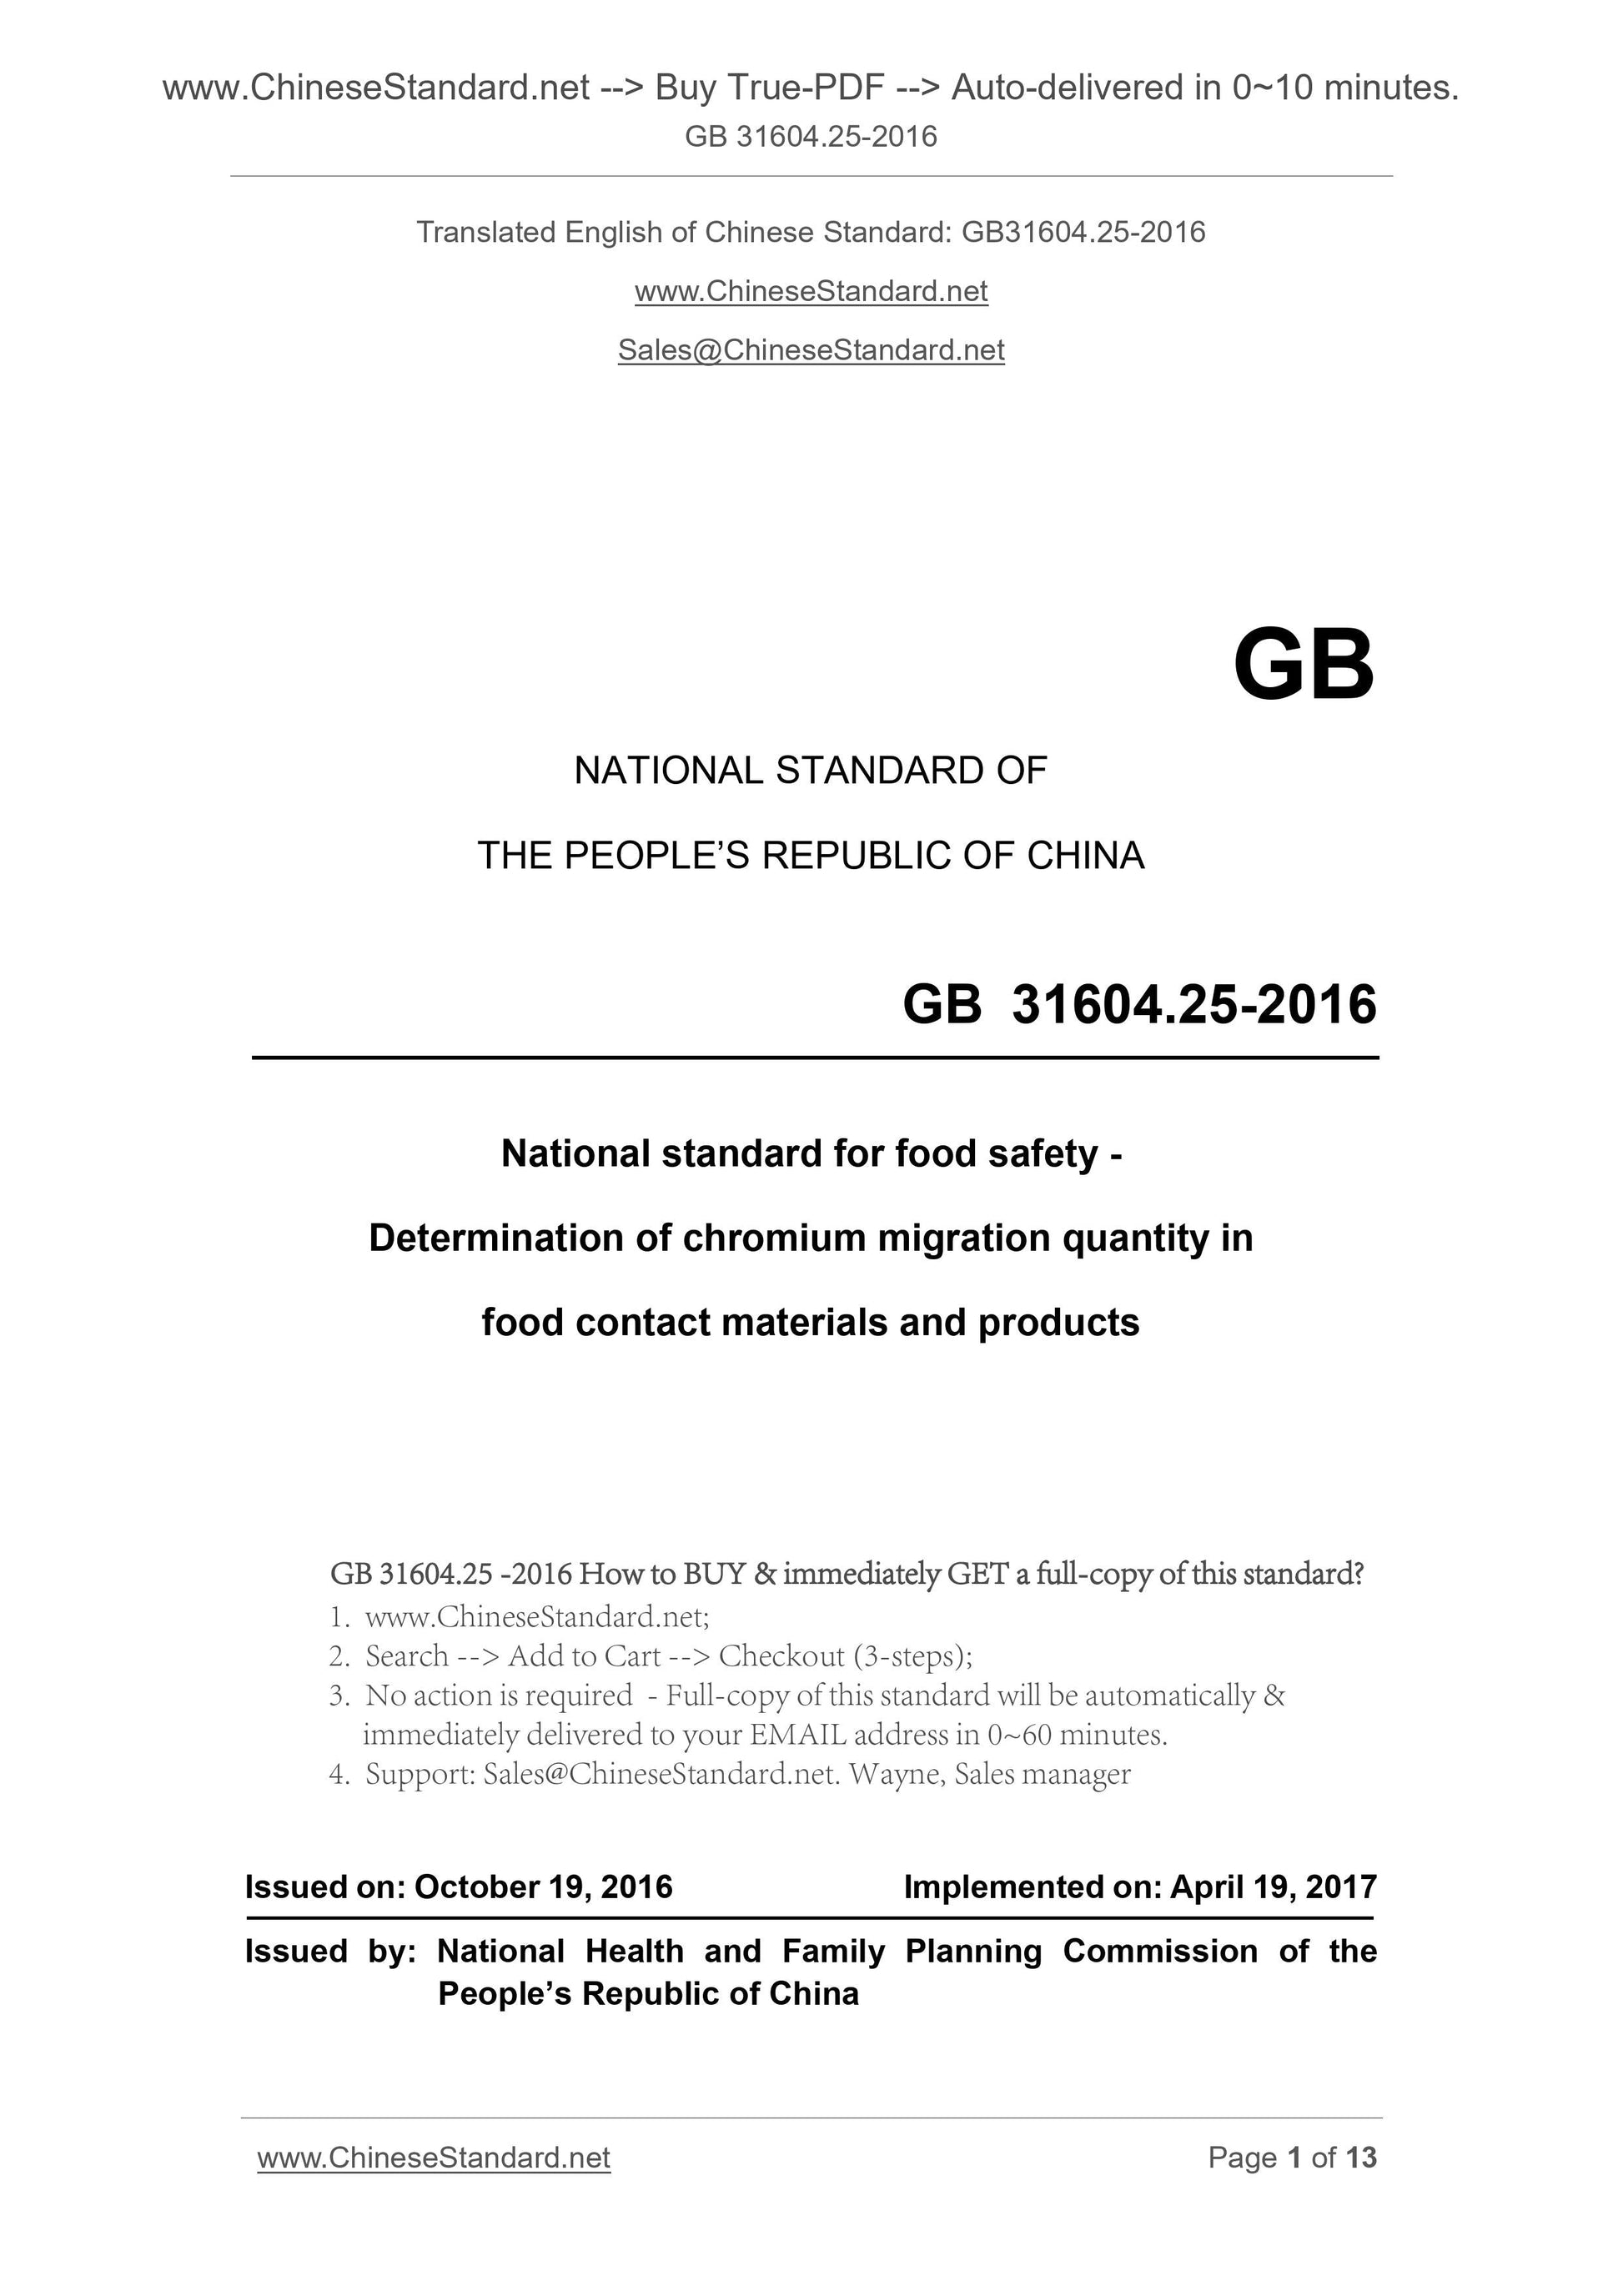 GB 31604.25-2016 Page 1